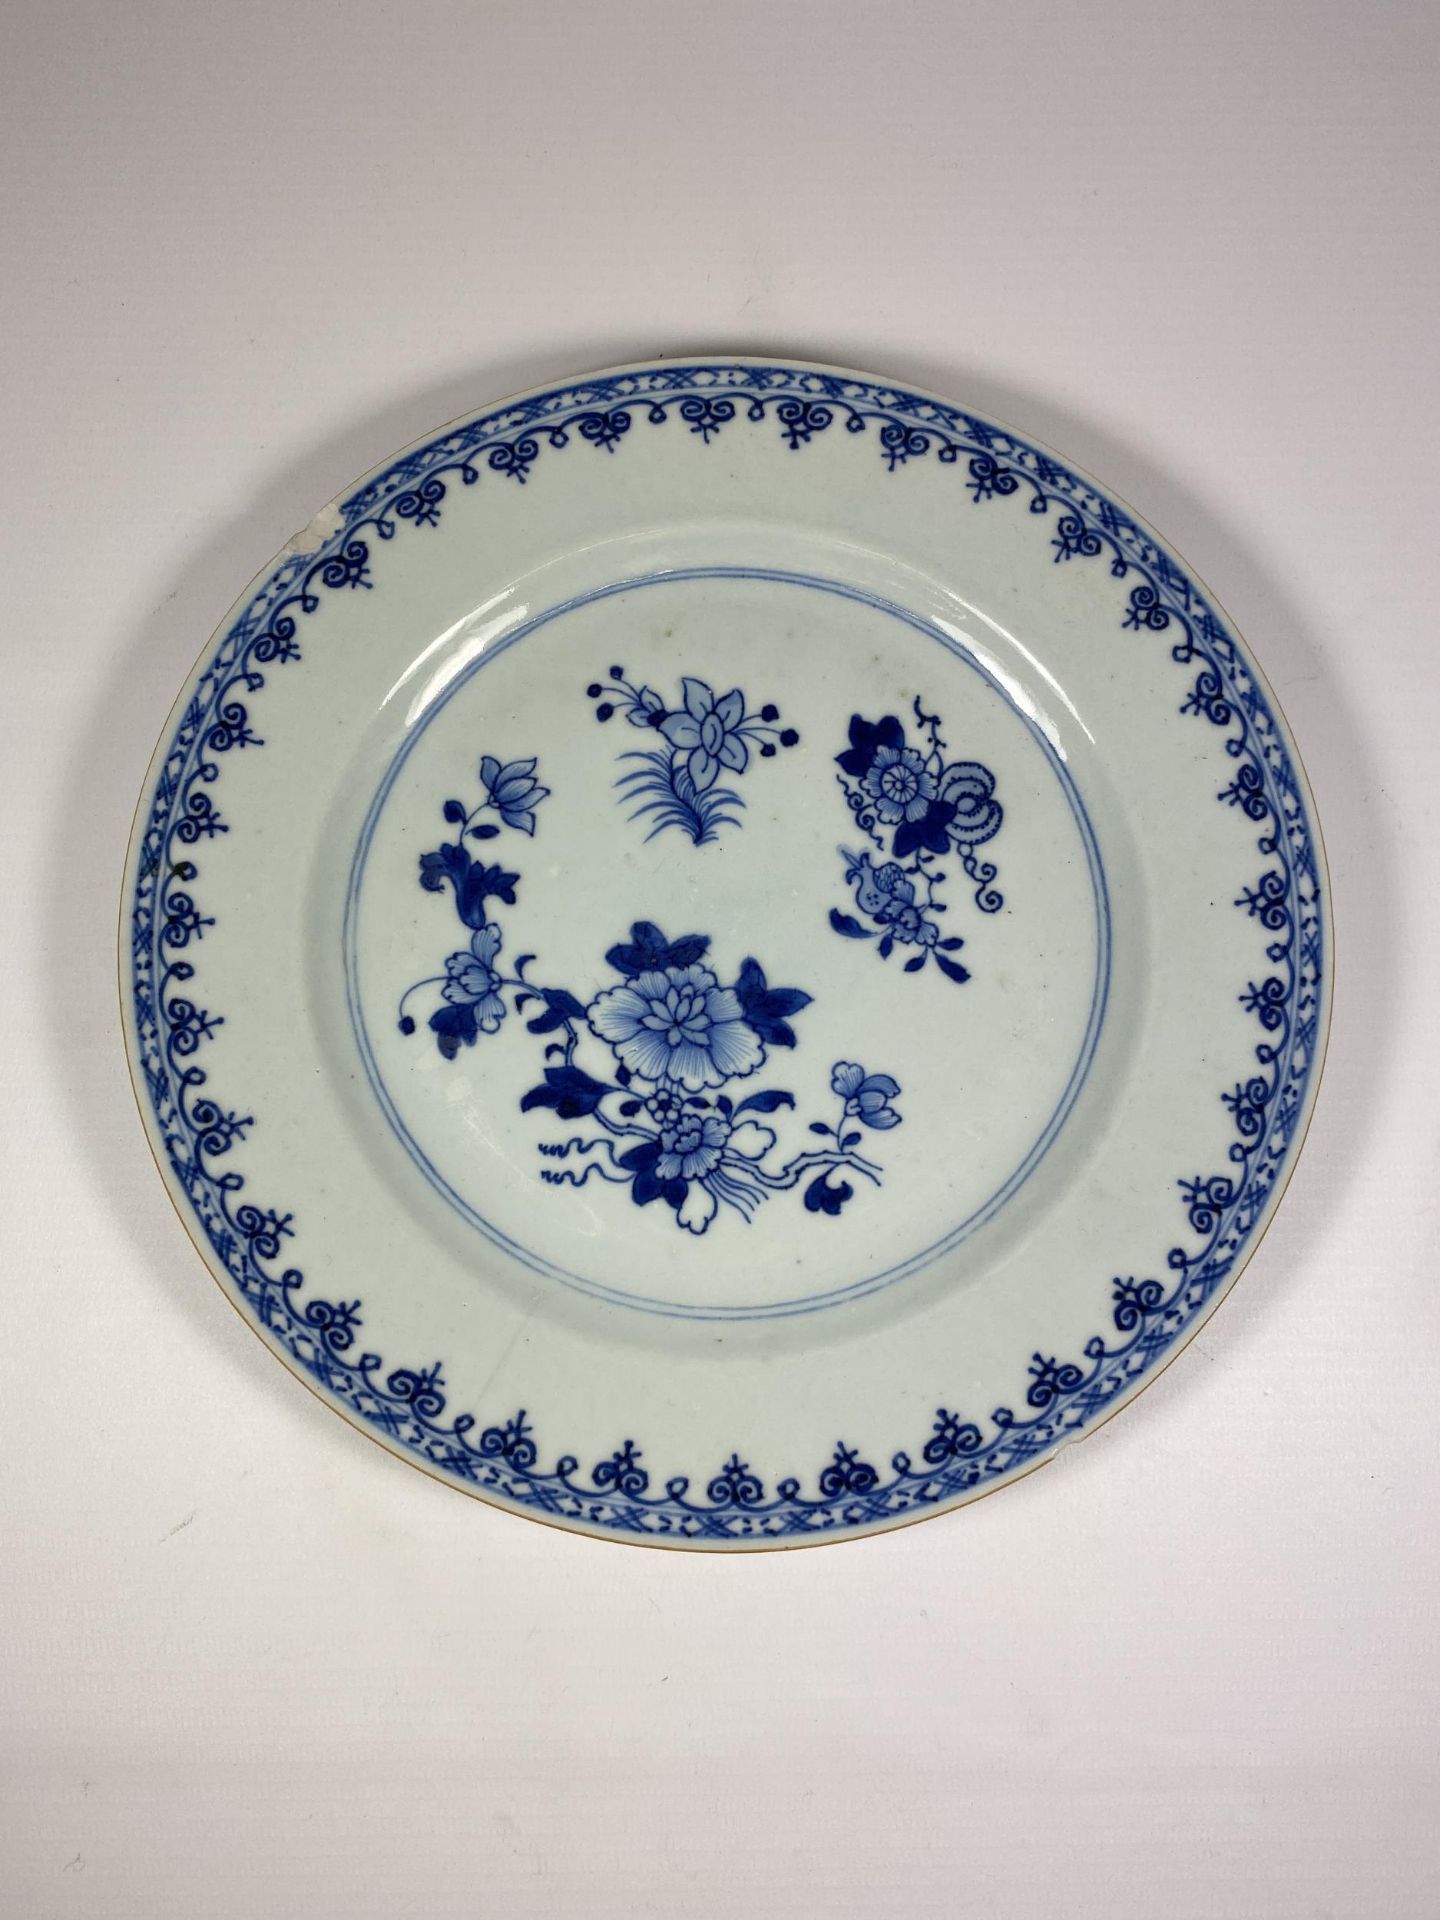 AN 18/19TH CENTURY CHINESE BLUE AND WHITE PORCELAIN FLORAL DESIGN PLATE, DIAMETER 23.5CM